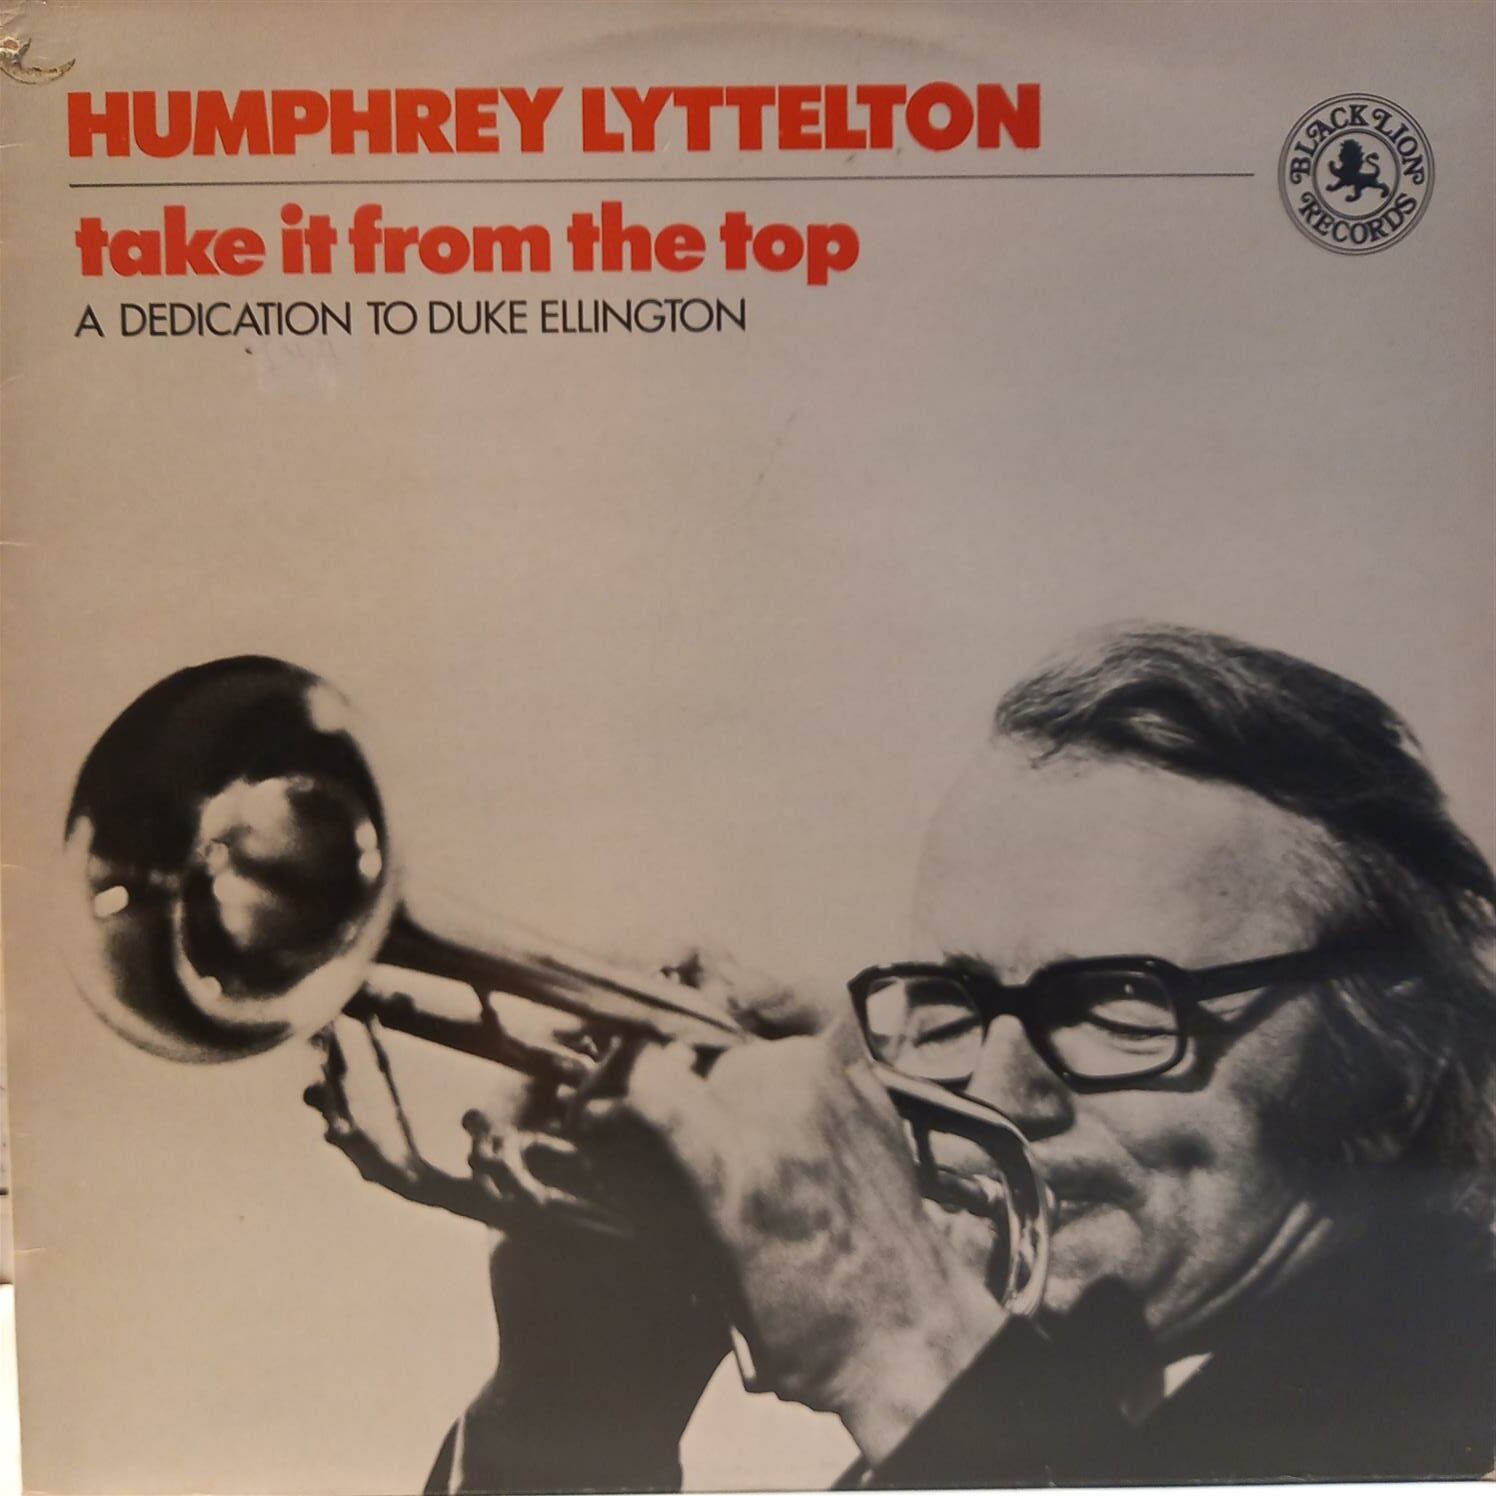 HUMPHREY LYTTELTON – TAKE IT FROM THE TOP ON